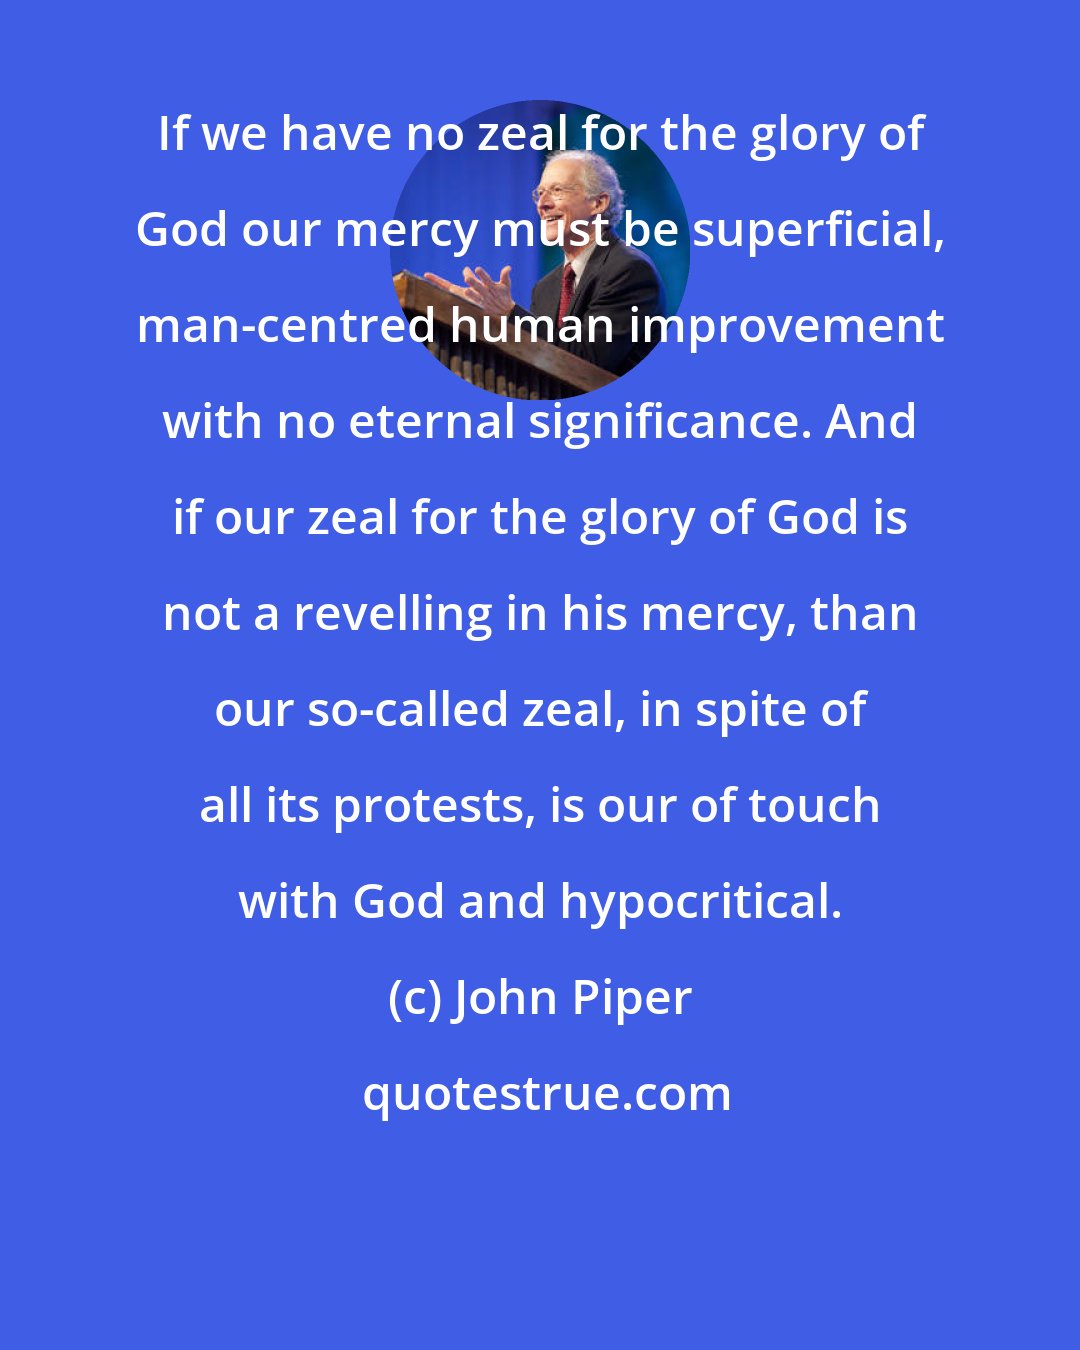 John Piper: If we have no zeal for the glory of God our mercy must be superficial, man-centred human improvement with no eternal significance. And if our zeal for the glory of God is not a revelling in his mercy, than our so-called zeal, in spite of all its protests, is our of touch with God and hypocritical.